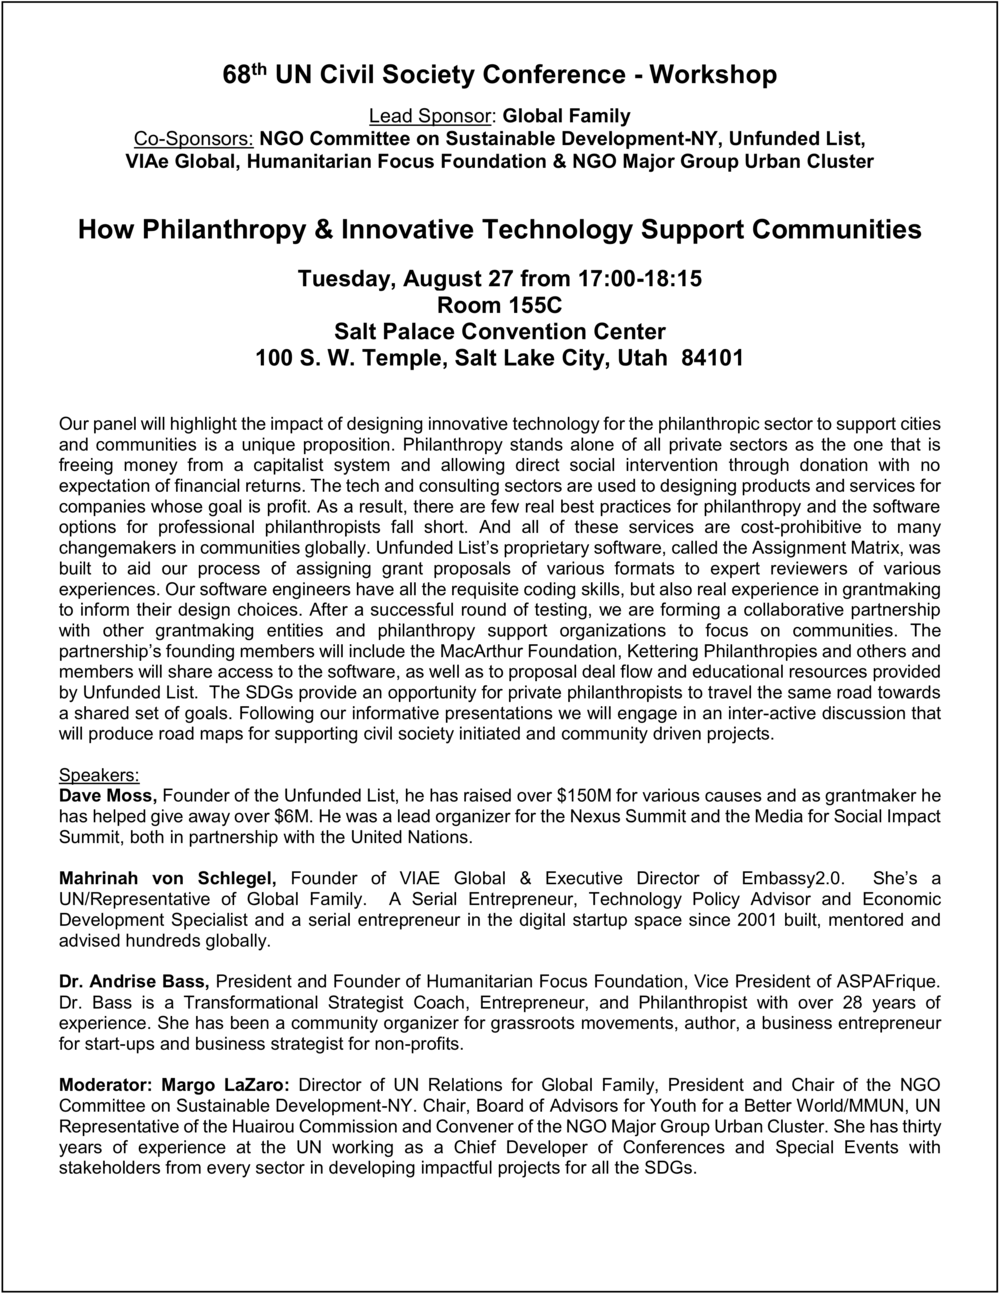 How+Philanthropy+&+Innovative+Technology+Support+Communities-+C2.docx2.png